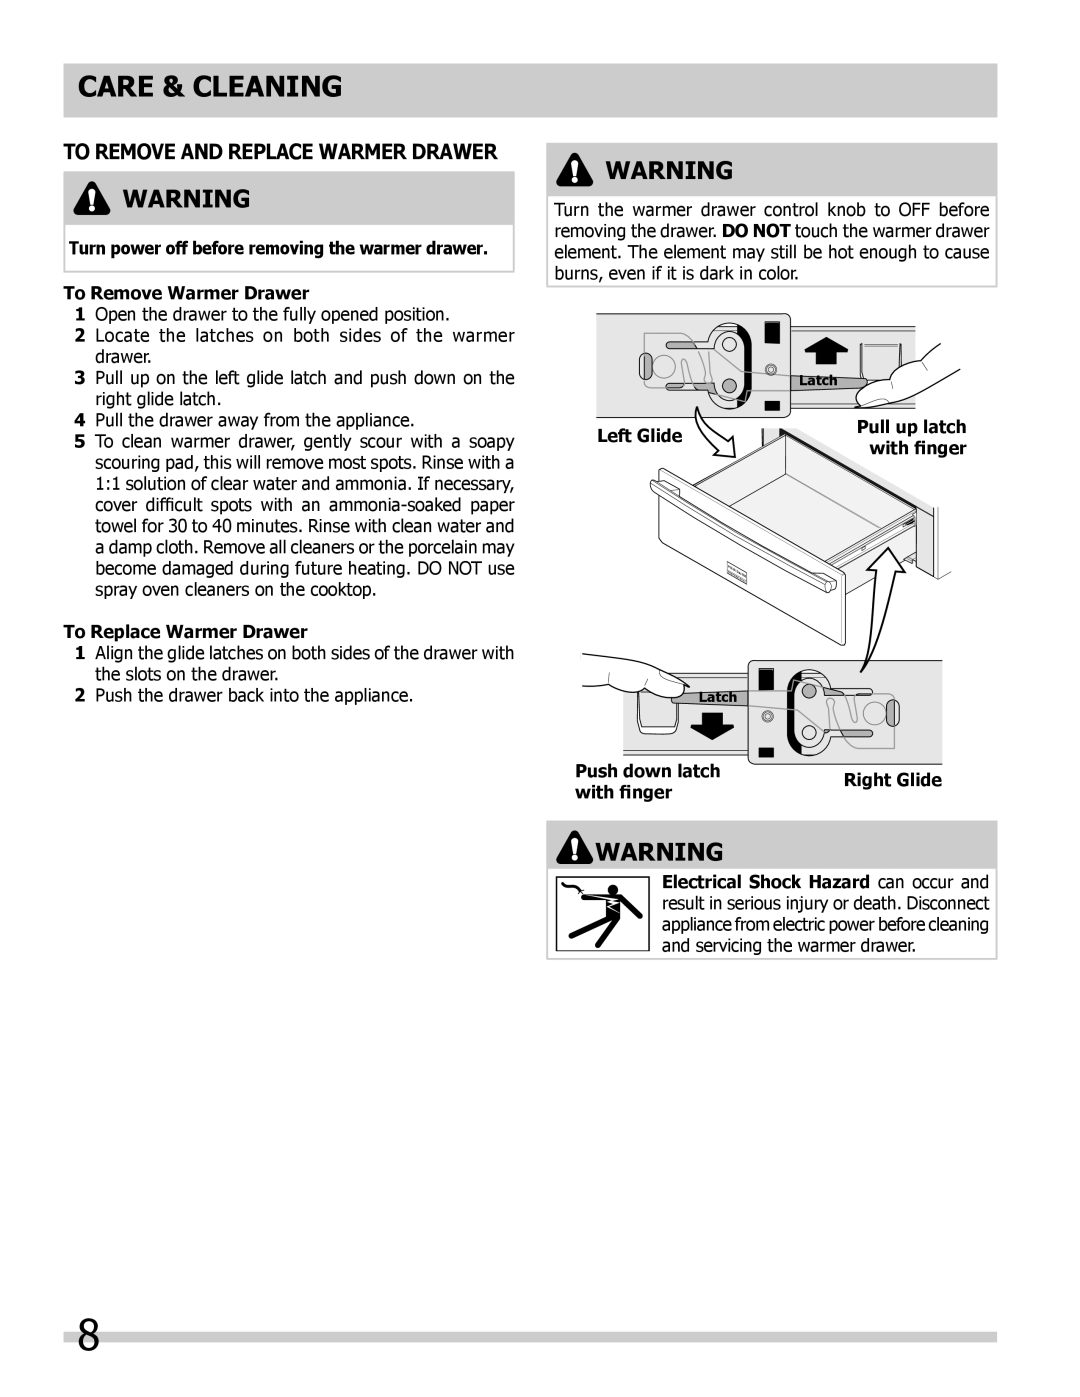 Frigidaire 318201024 important safety instructions care & cleaning, To Remove and Replace Warmer Drawer 